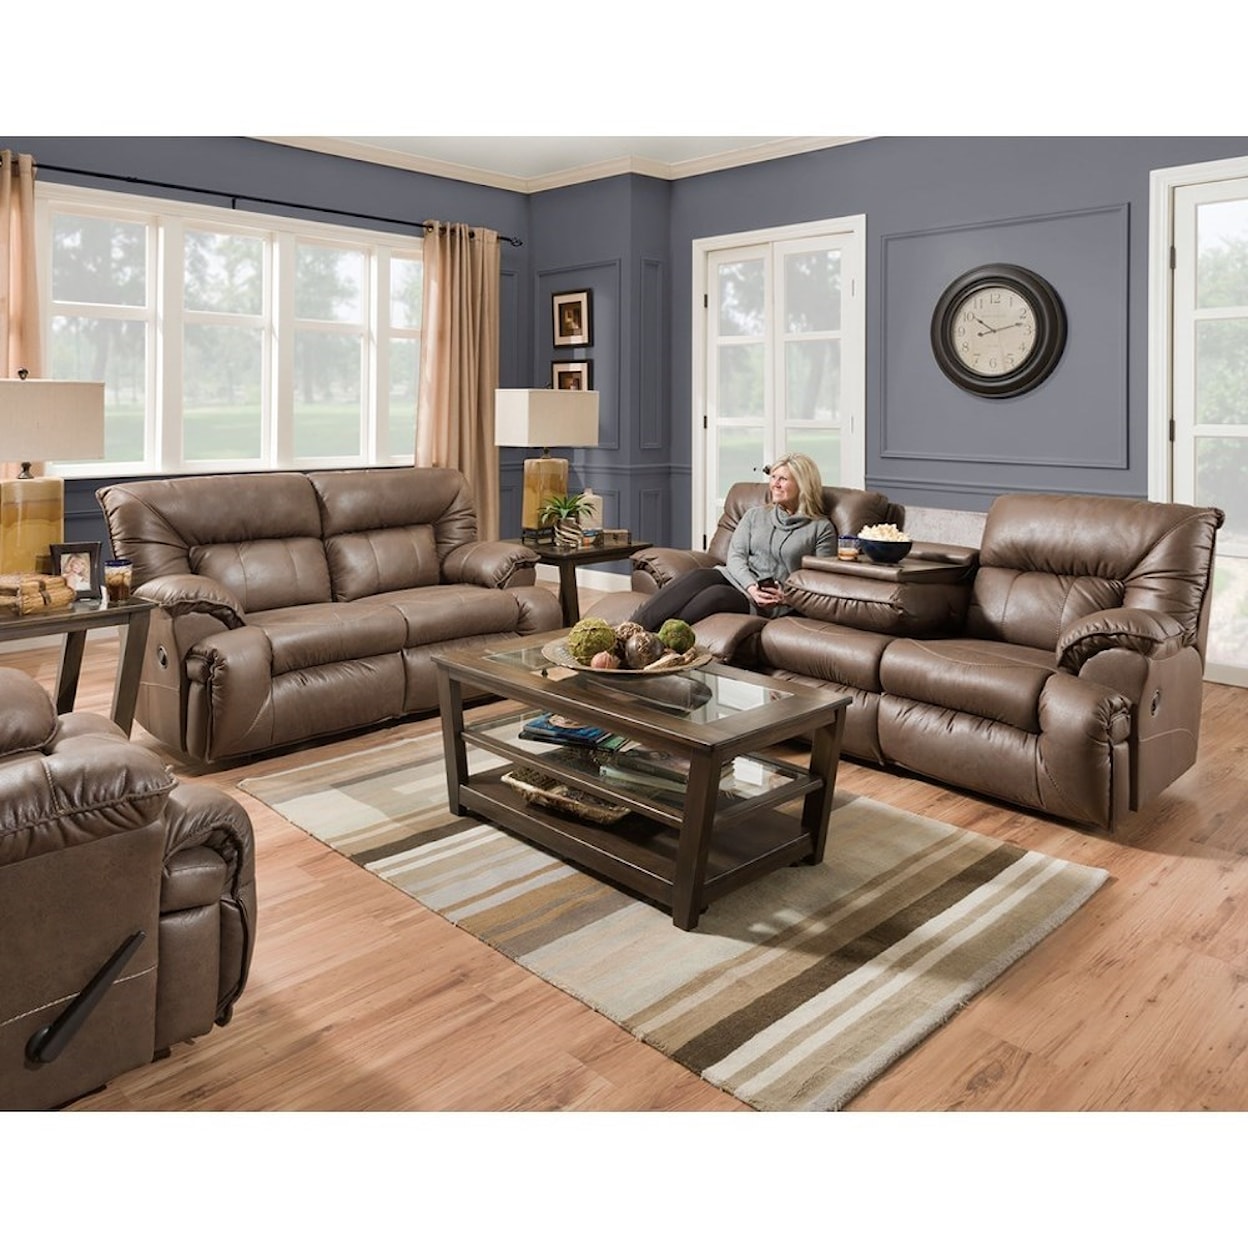 Franklin 764 Hector Power Reclining Living Room Group